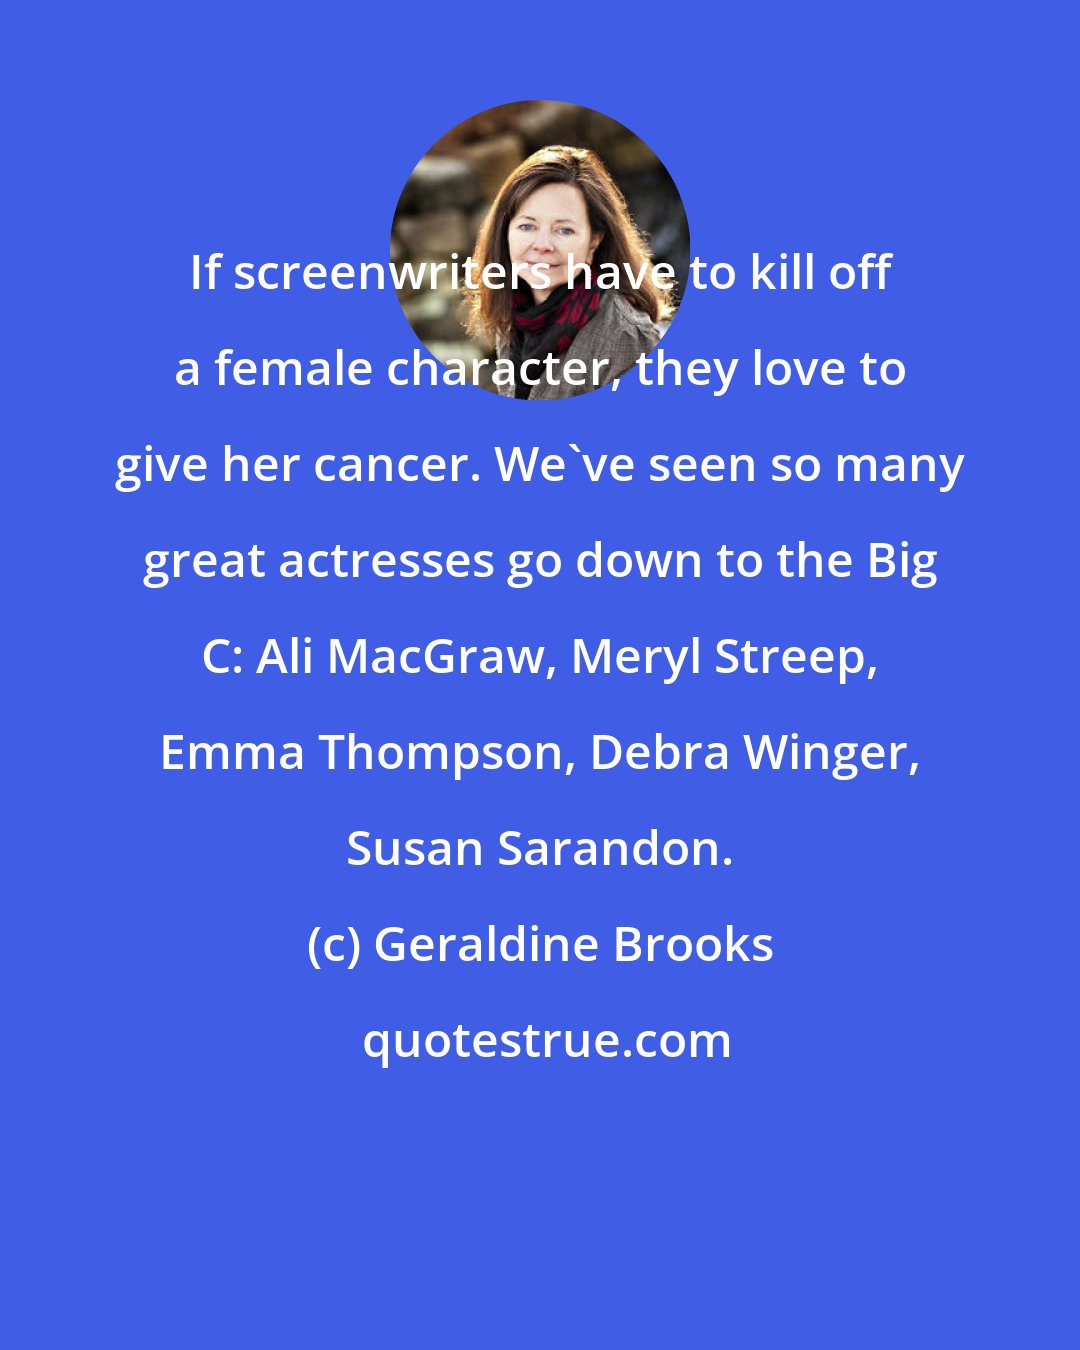 Geraldine Brooks: If screenwriters have to kill off a female character, they love to give her cancer. We've seen so many great actresses go down to the Big C: Ali MacGraw, Meryl Streep, Emma Thompson, Debra Winger, Susan Sarandon.